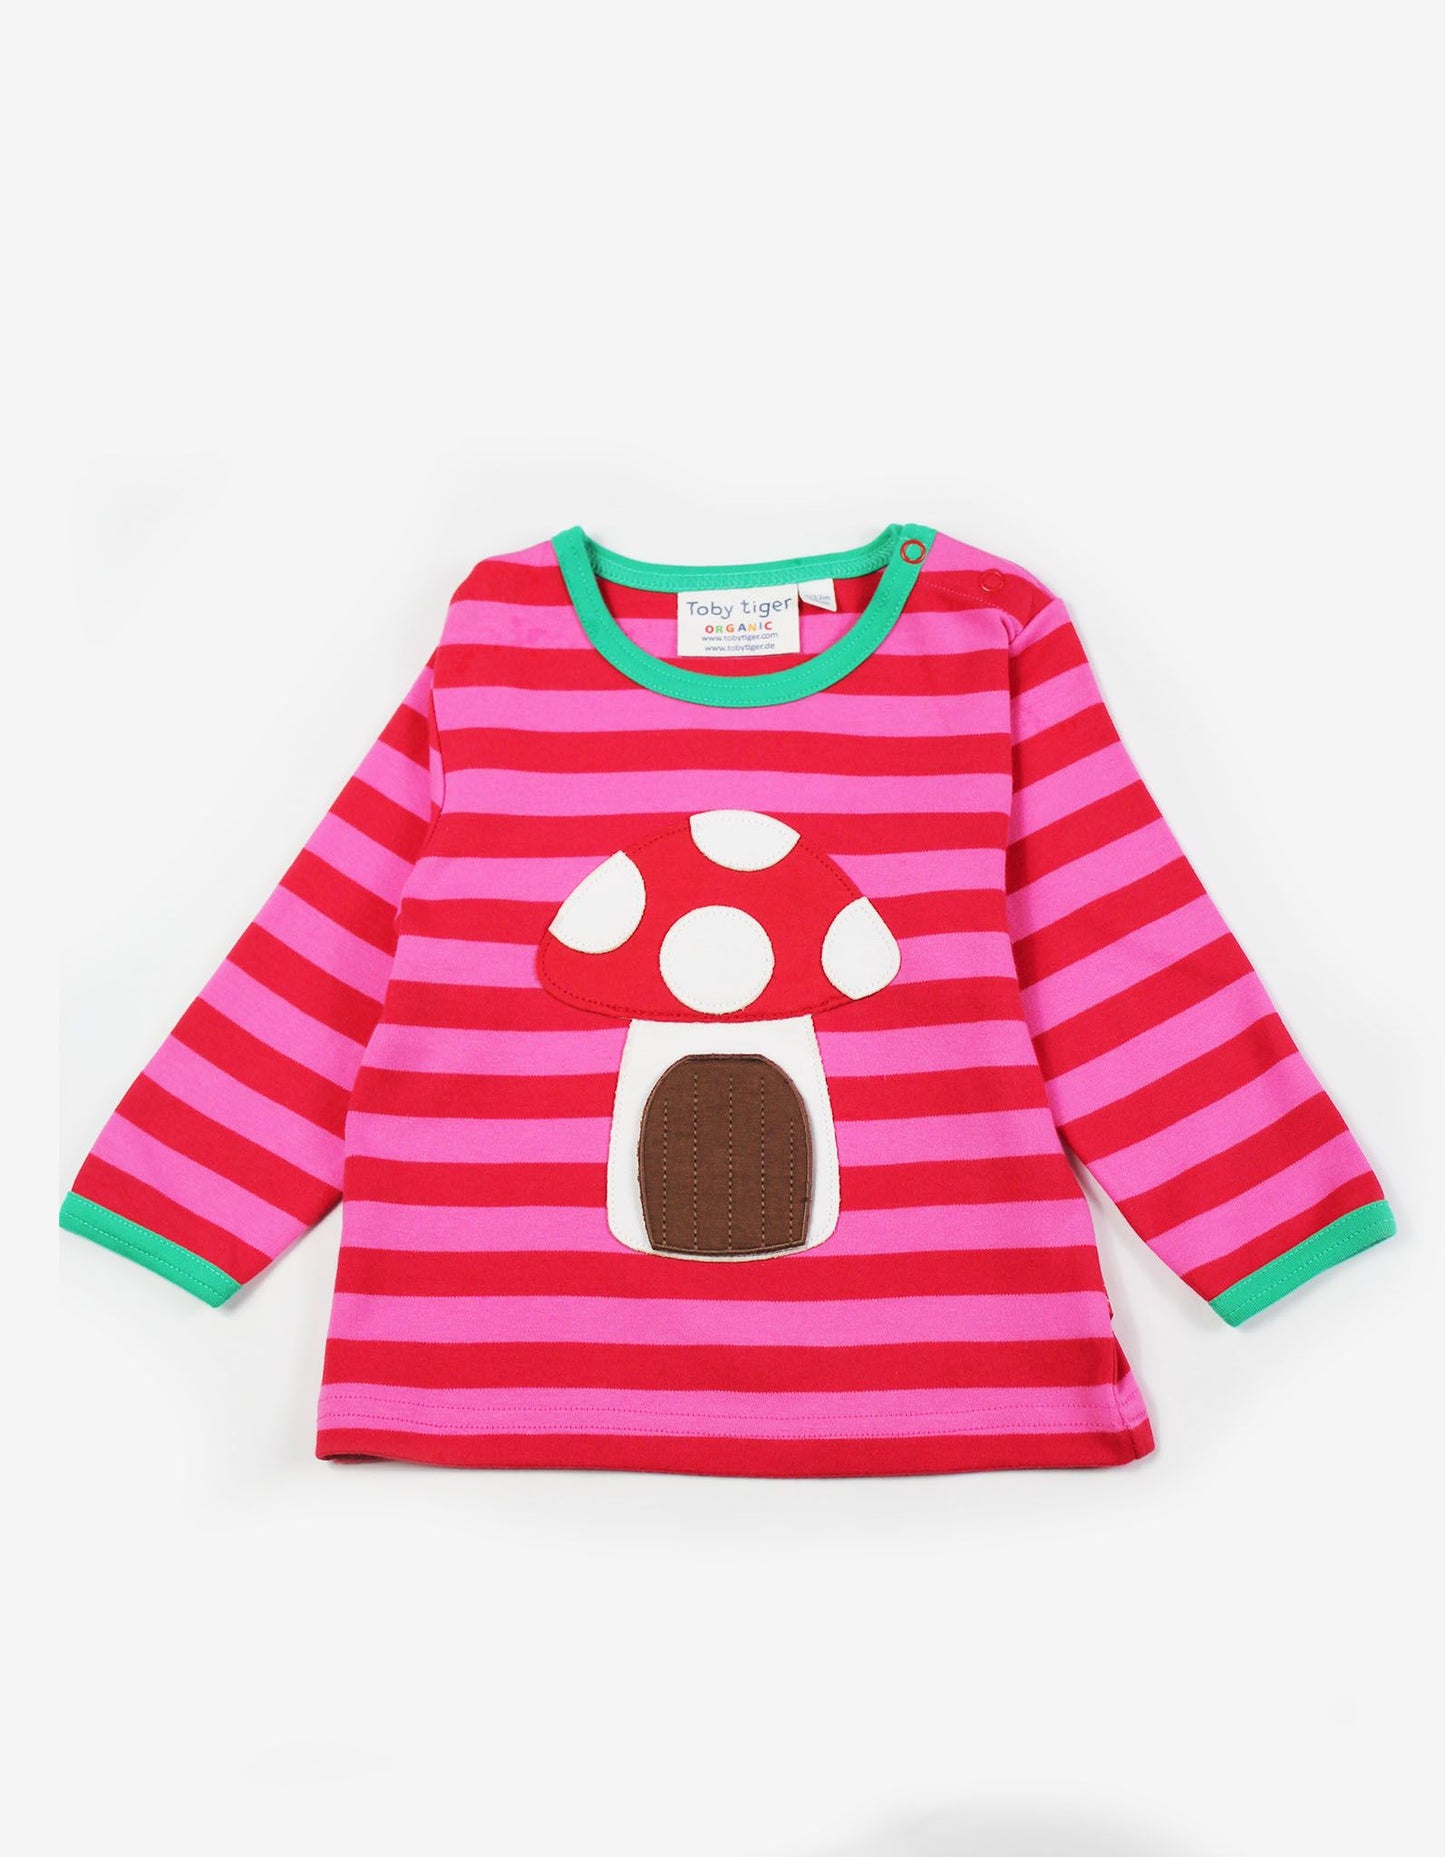 red and pink striped t shirt with mushroom and mouse applique